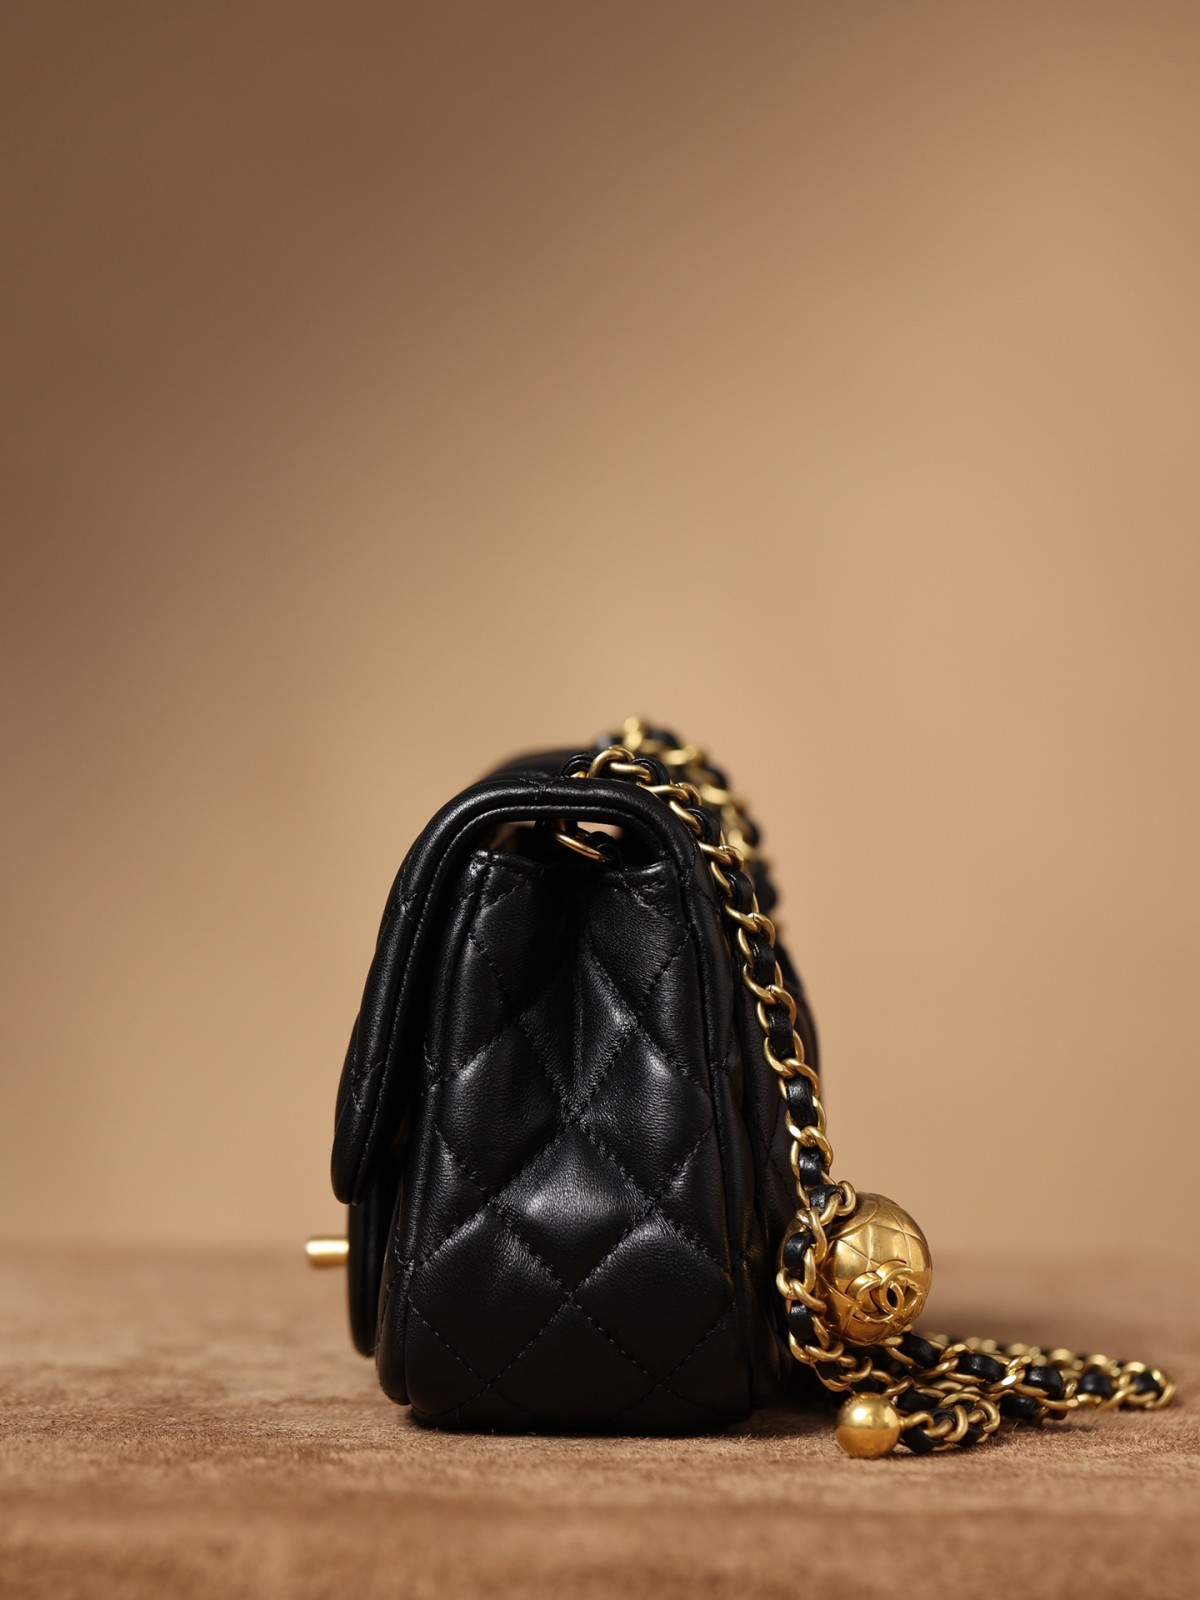 Shebag is serious to the Mini Classic flap bag with gold ball this time！（2024 Week 3）-最高品質の偽のルイヴィトンバッグオンラインストア、レプリカデザイナーバッグru